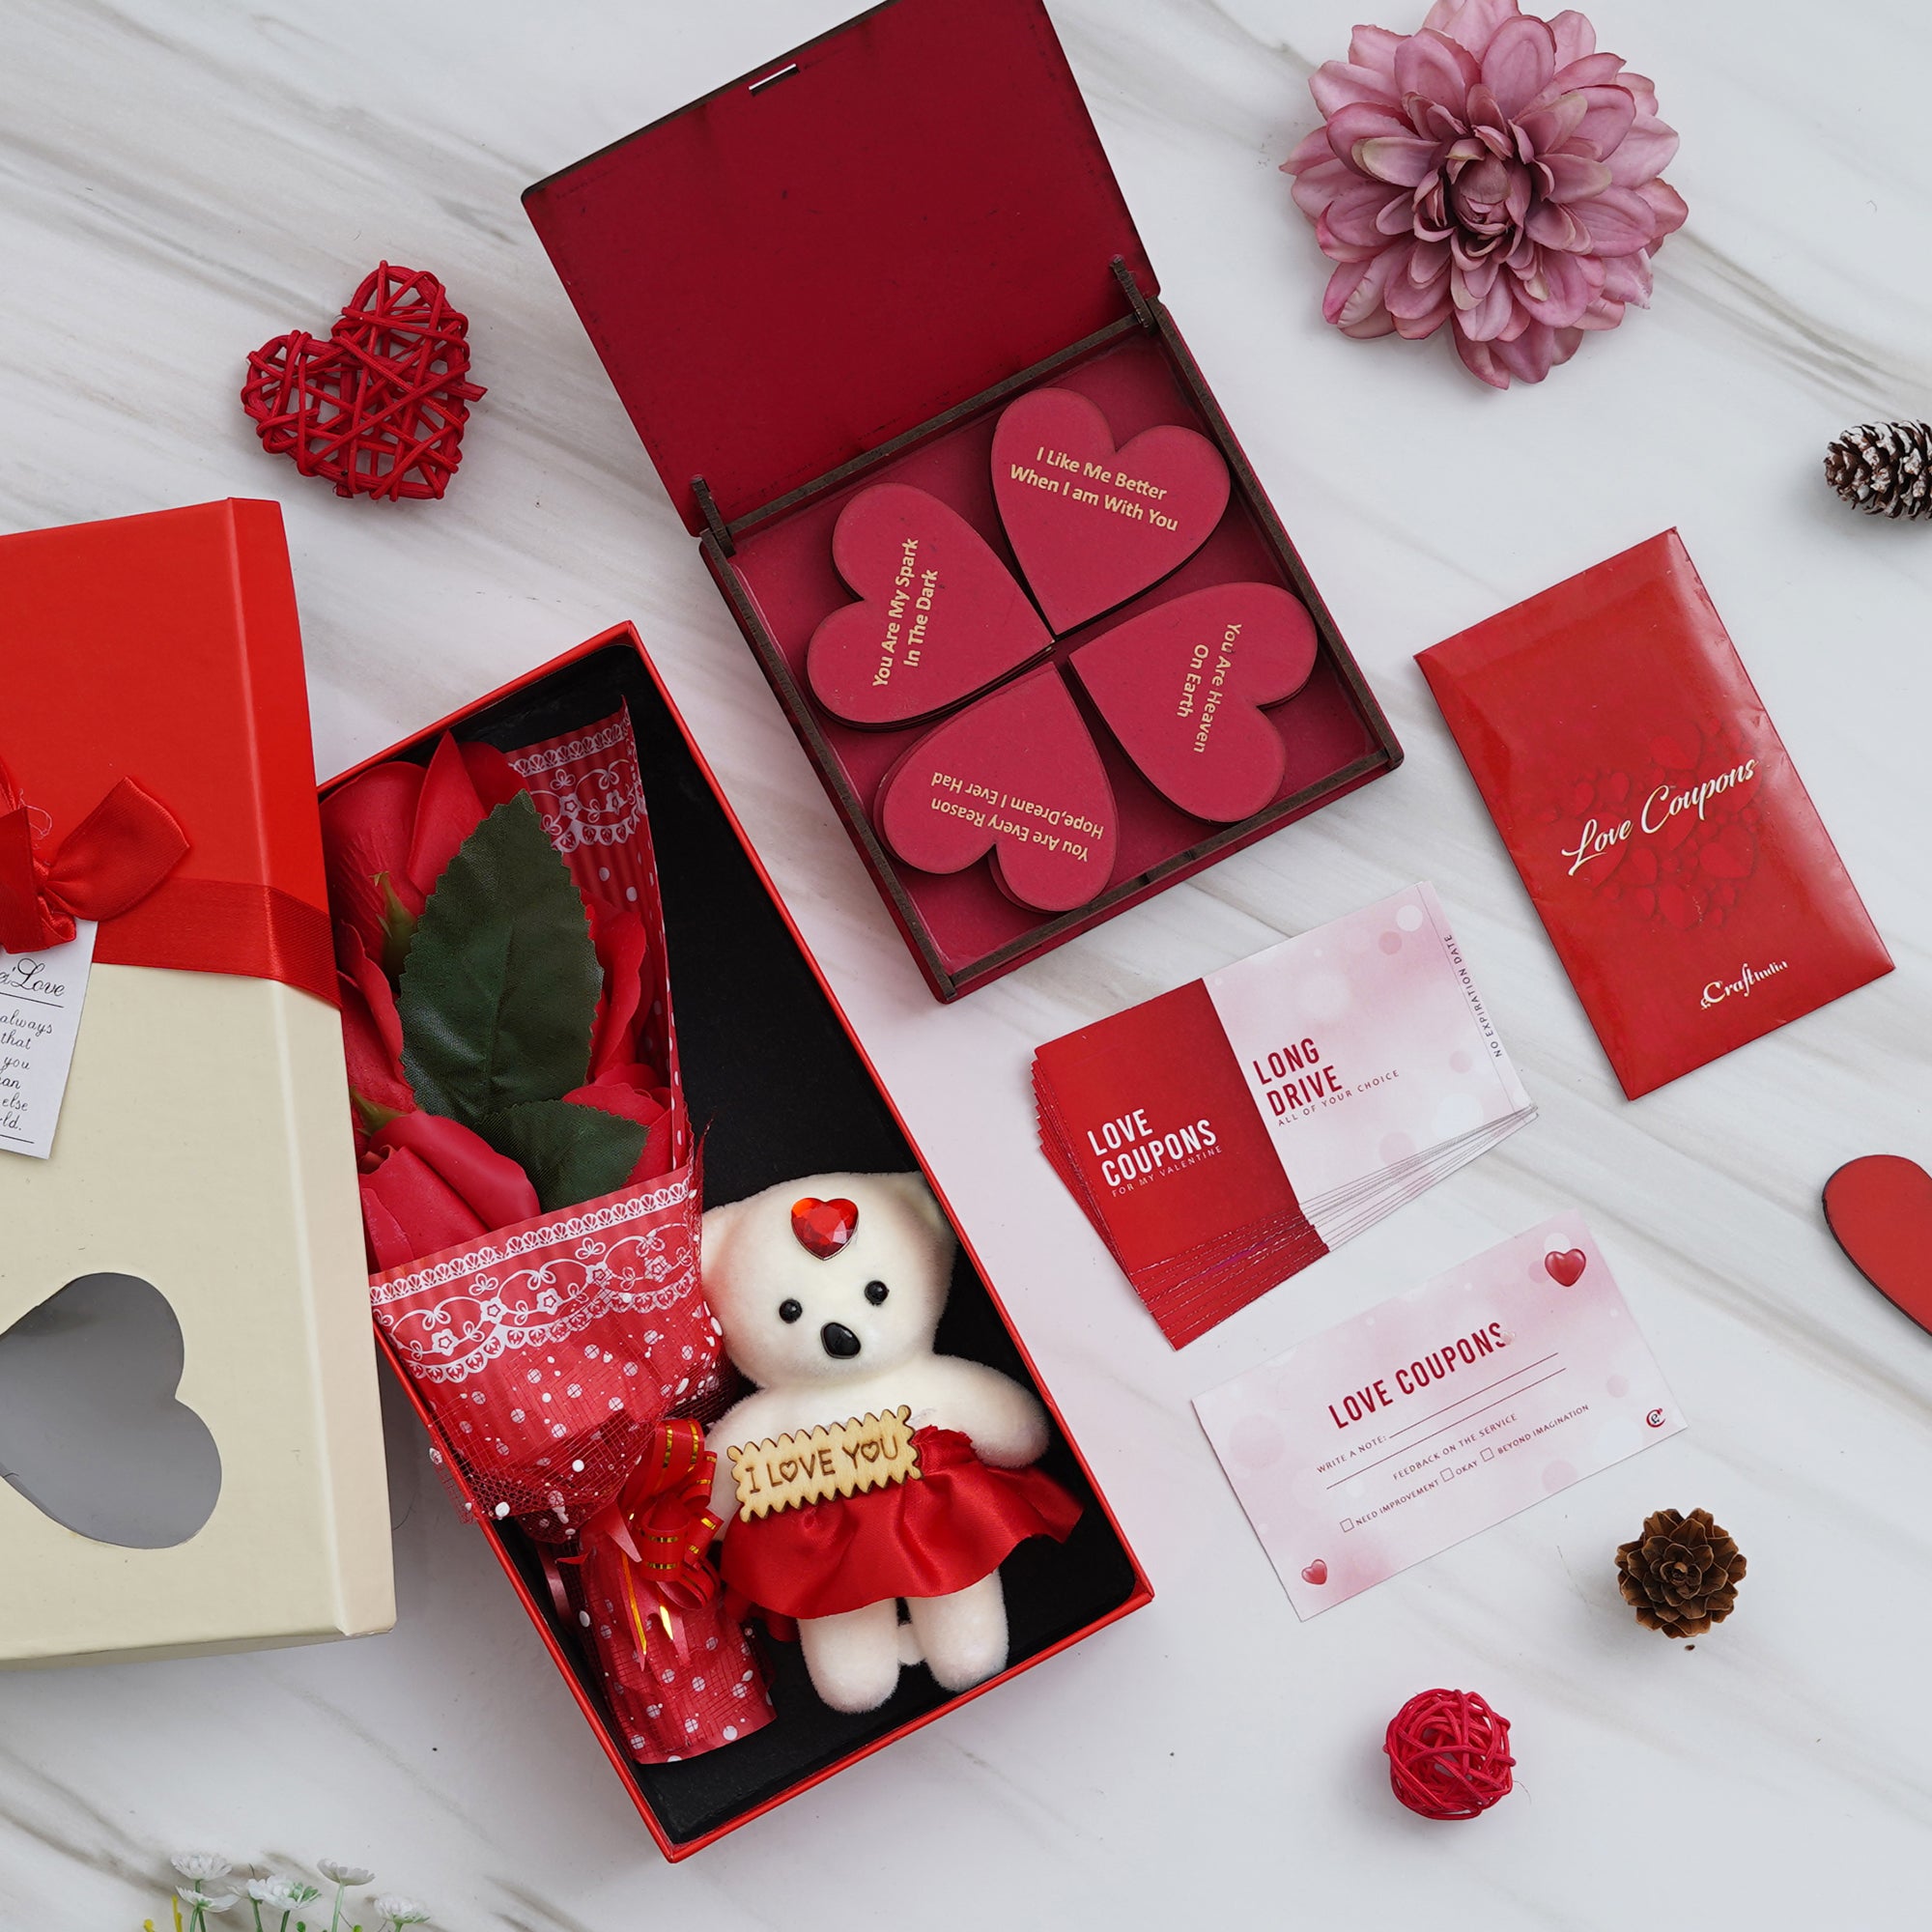 Valentine Combo of Pack of 12 Love Coupons Gift Cards Set, "20 Reasons Why I Love You" Printed on Little Red Hearts Decorative Wooden Gift Set Box, Red Roses Bouquet and White, Red Teddy Bear Valentine's Rectangle Shaped Gift Box